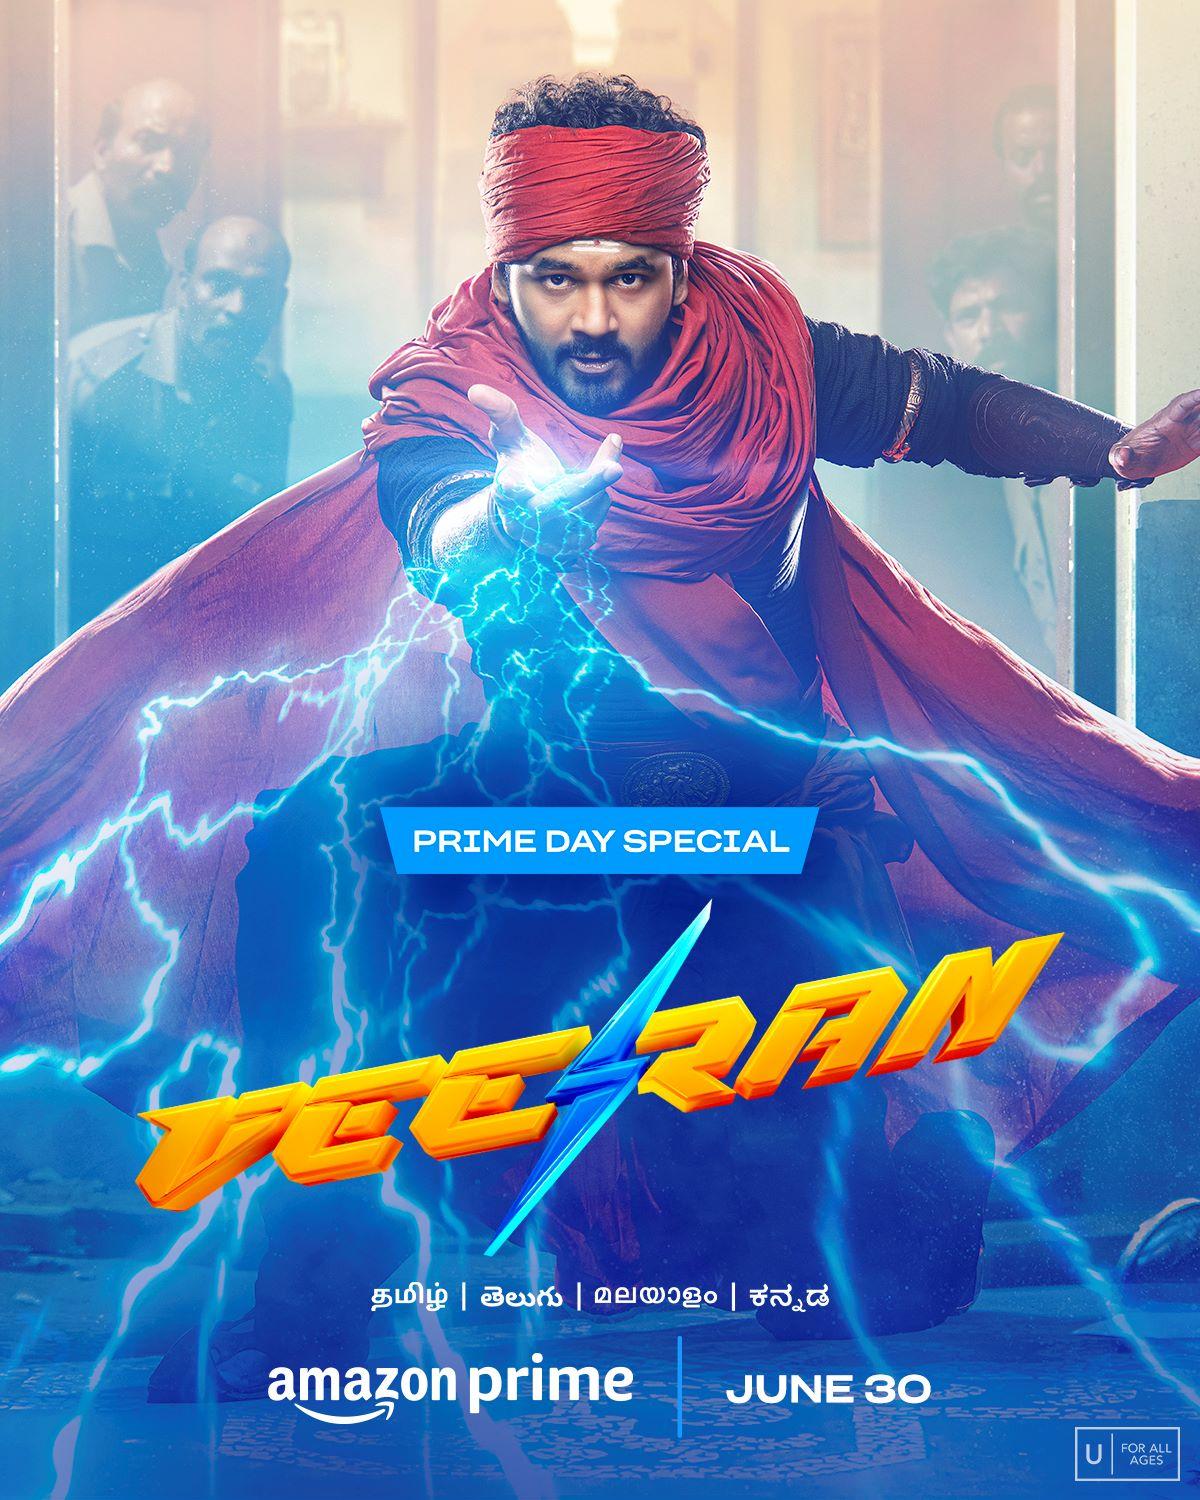 Veeran (June 30)  - Veeran, a 2023 Indian Tamil-language superhero film, brings together the creative talents of writer and director ARK Saravan, known for Maragadha Naanayam, and production house Sathya Jyothi Films. The film features a talented cast including Hiphop Tamizha Aadhi, Vinay Rai, and Athira Raj in the lead roles, supported by Munishkanth, Kaali Venkat, R.Badree, and Sassi Selvaraj. Veeran promises to deliver an exciting cinematic experience in the realm of superheroes.